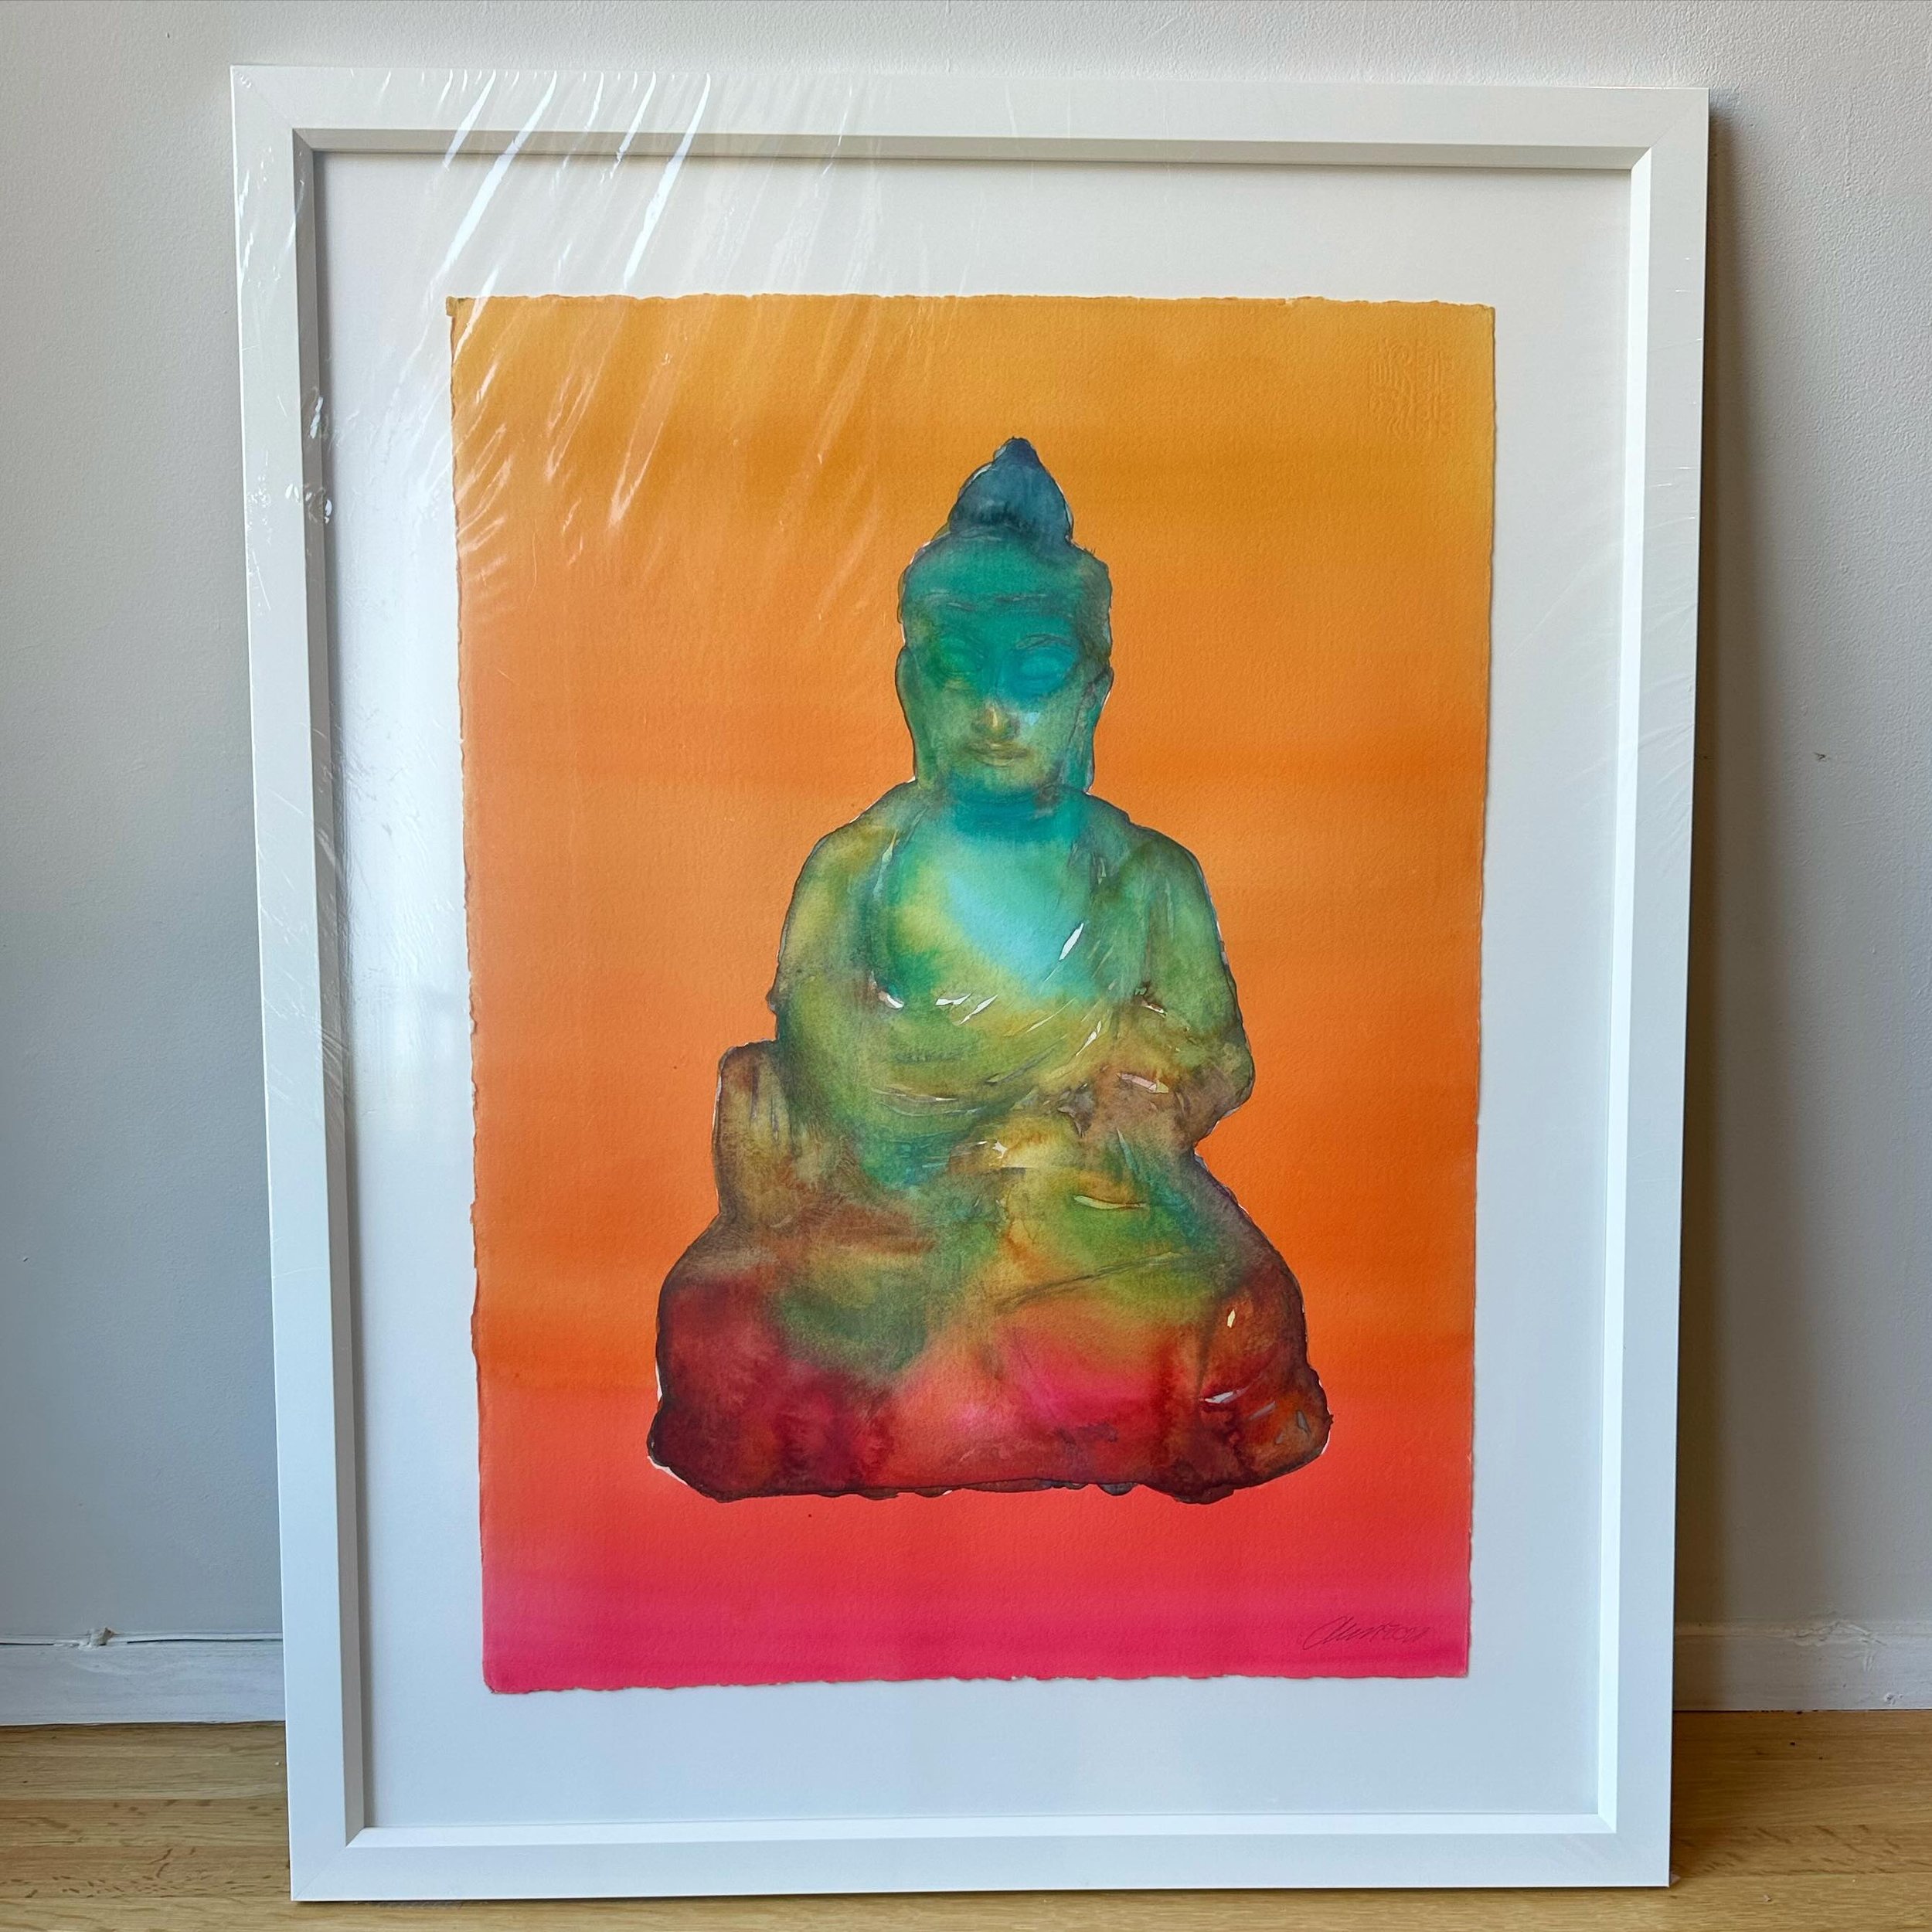 This Buddha headed for its permanent home.

Always grateful to see them live in someone else&rsquo;s collection. 

Thank you KP and Tc for adding me to your collection. 
I am honored.
.
🧘🪷
.
.
.
.
#buddha#art#soldart#buyartonline #buddha#buddhaart 